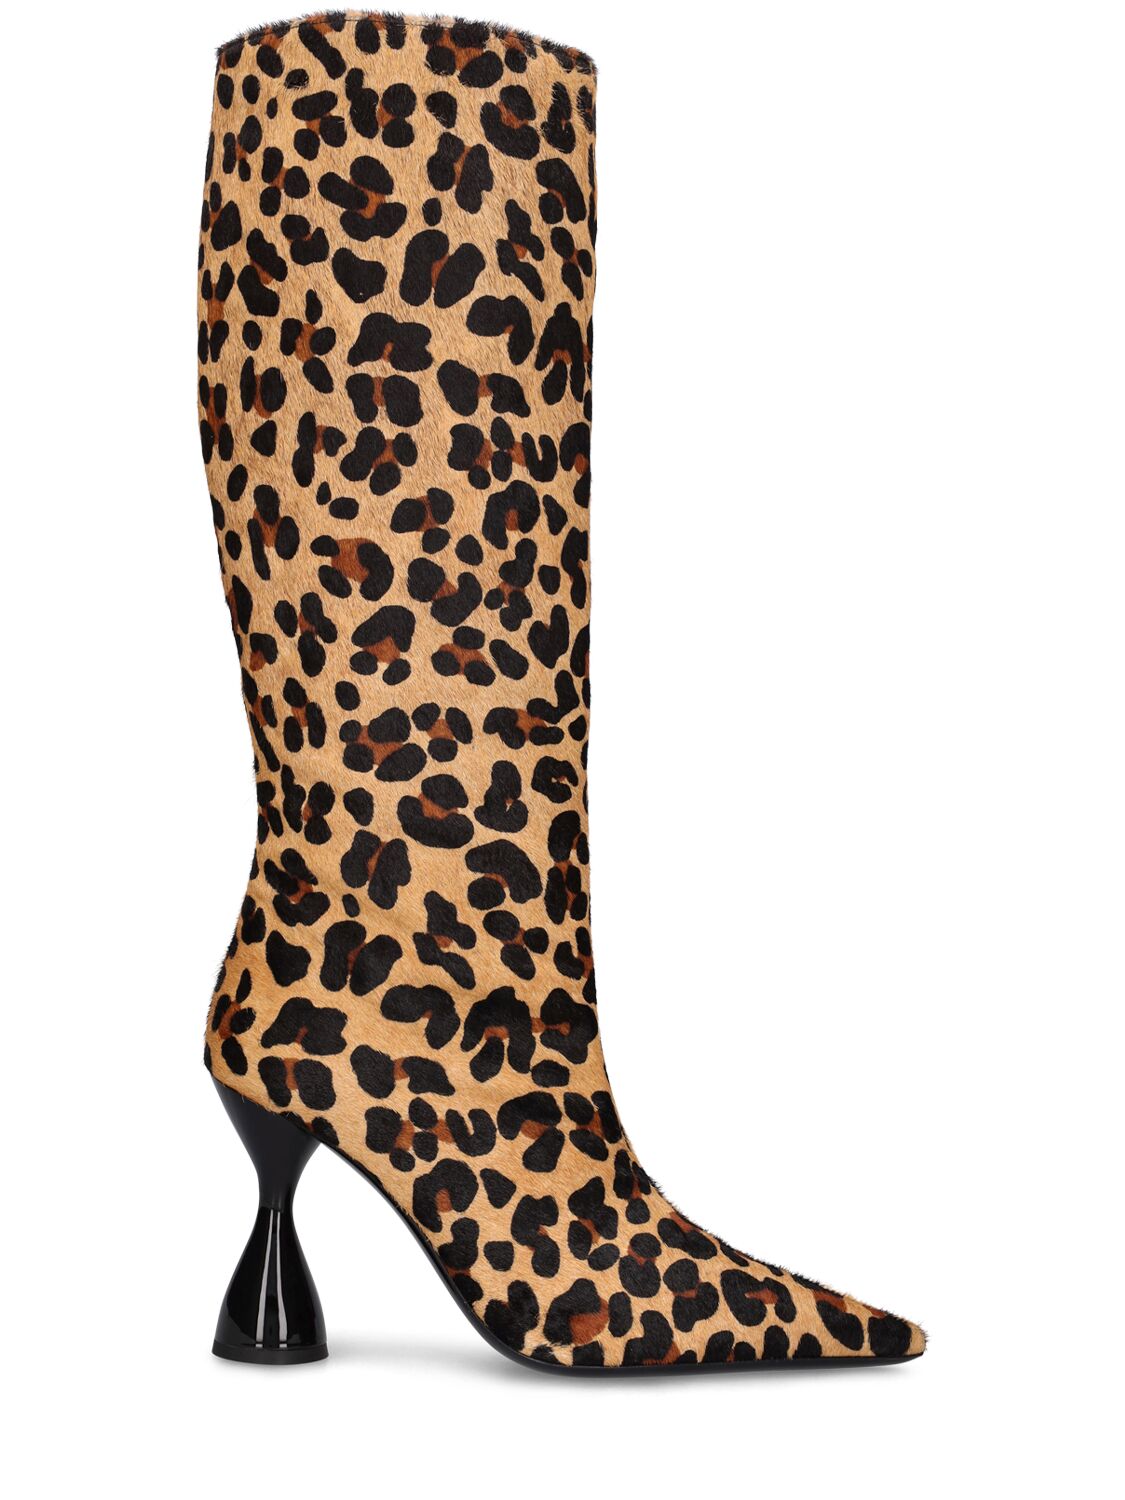 Simon Miller 75mm Verner Leather Tall Boots In Leopard